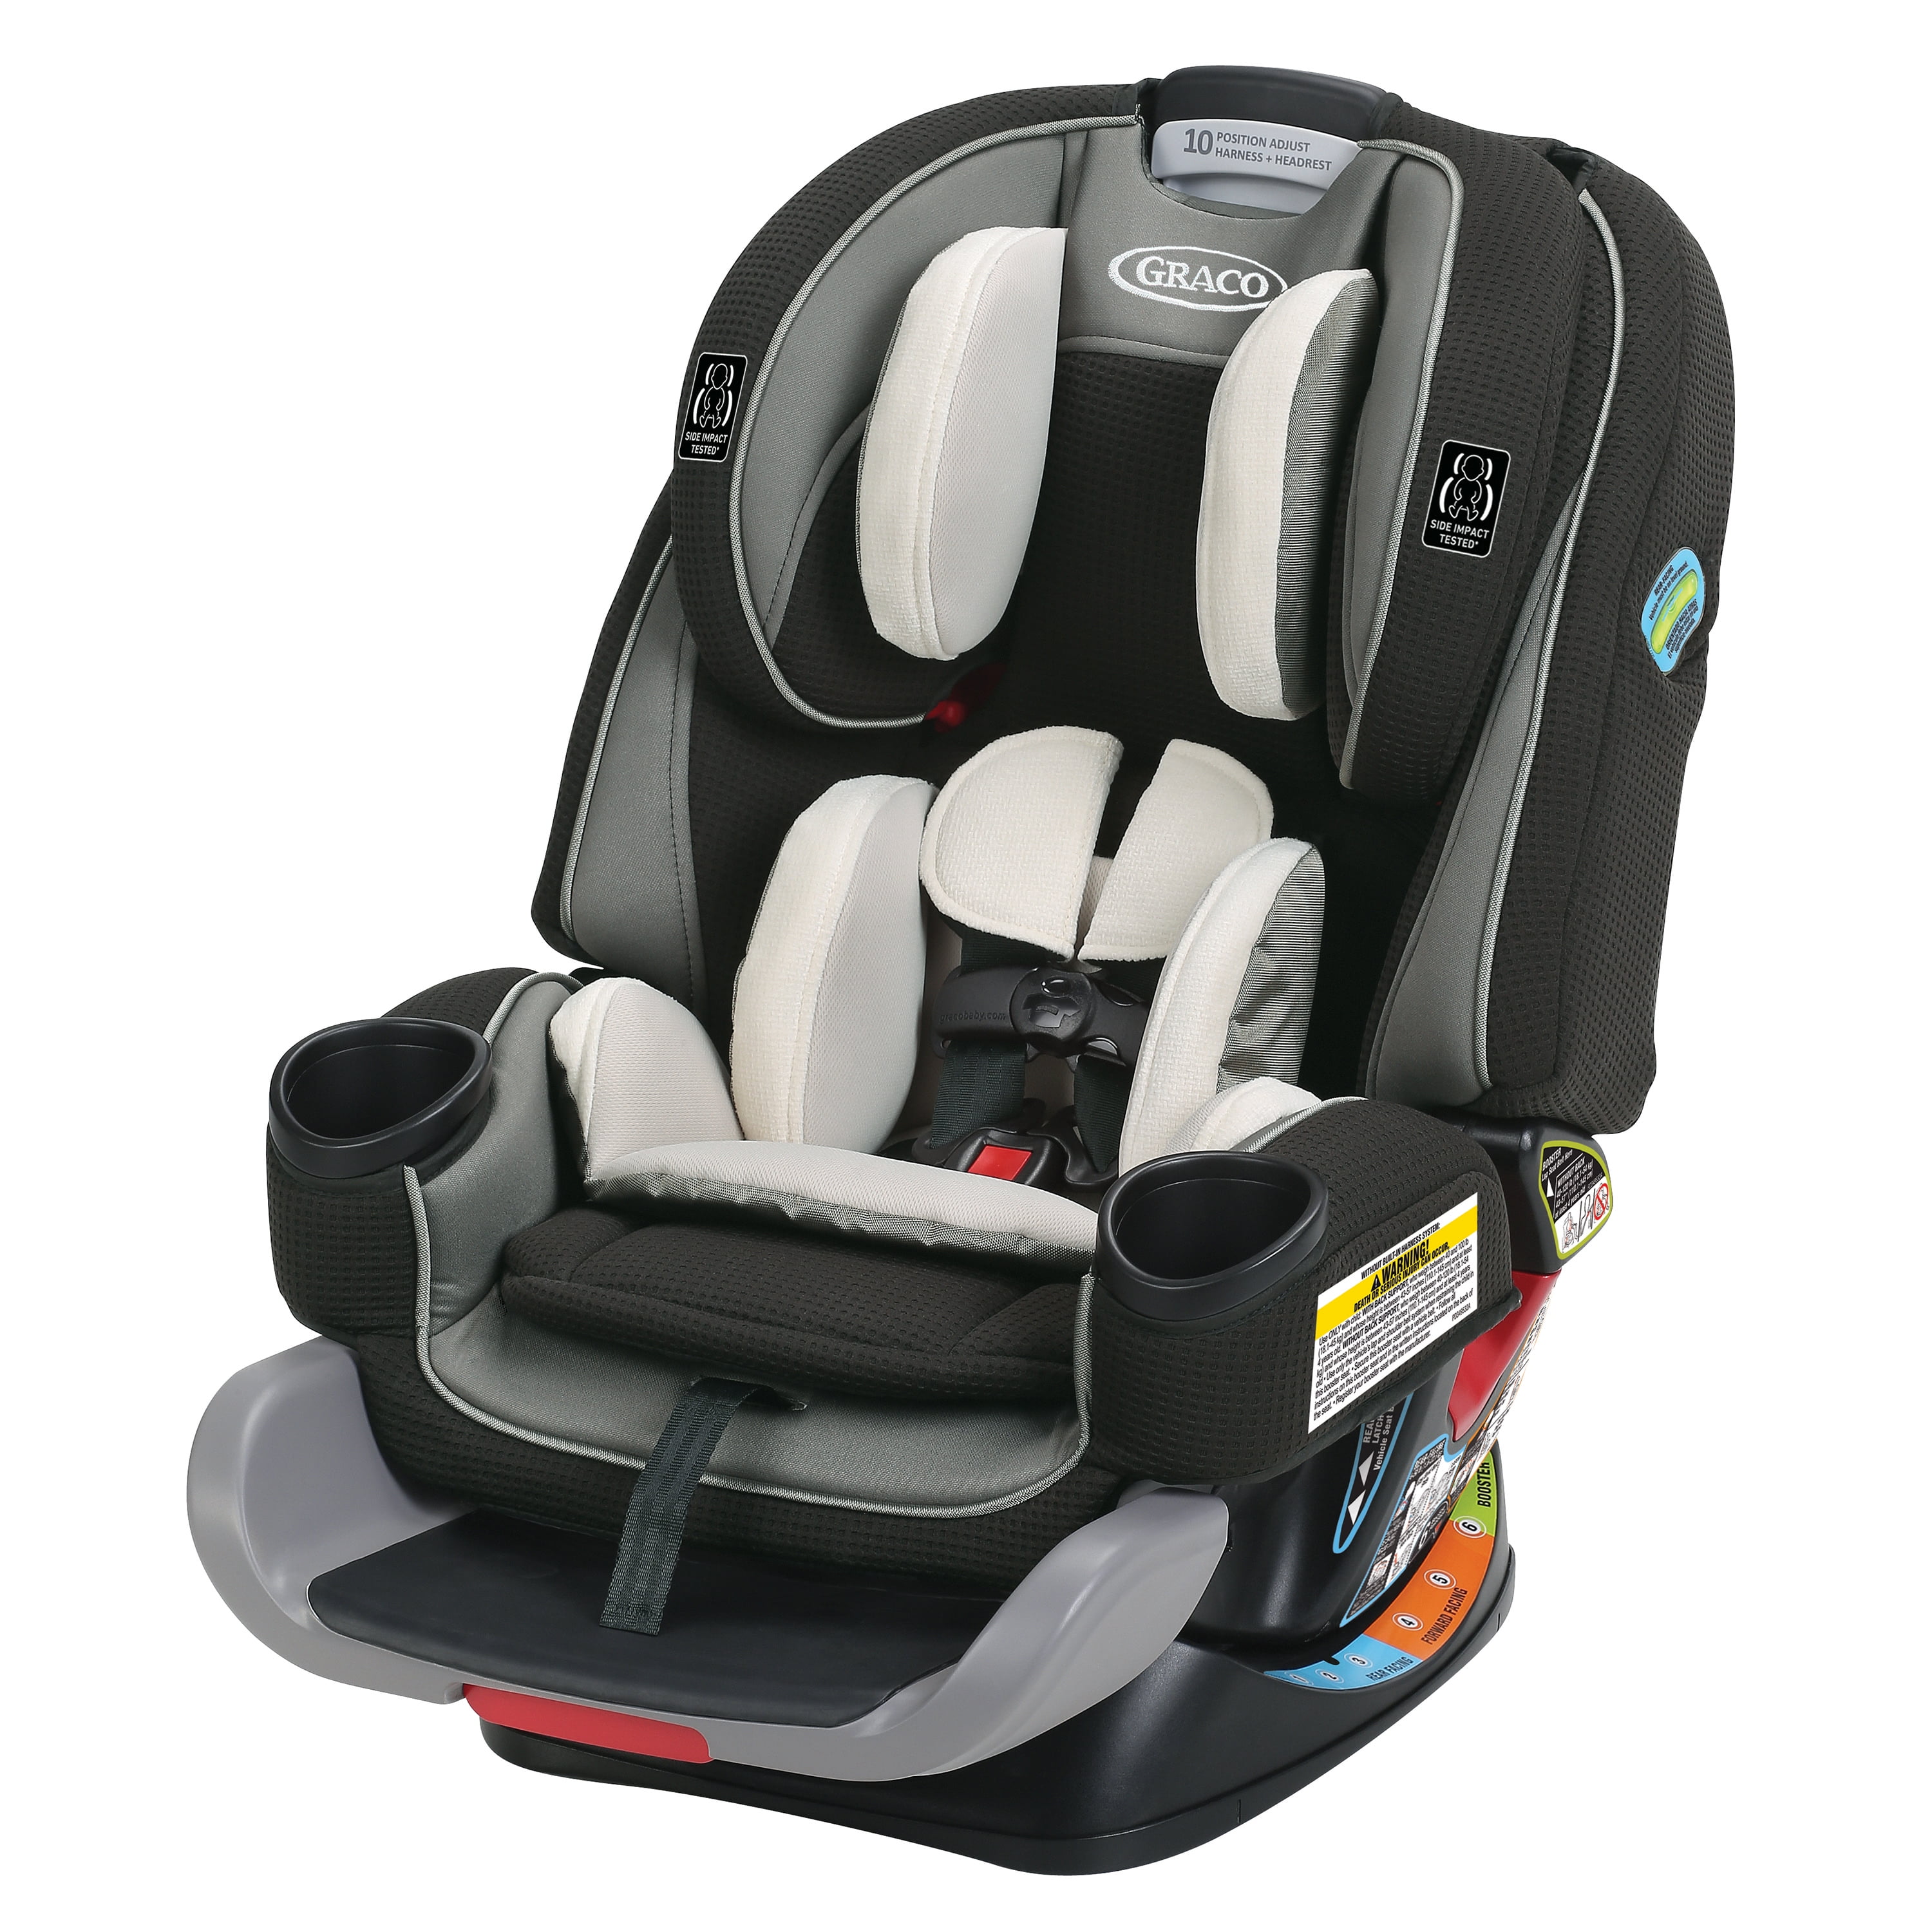 graco baby extend2fit